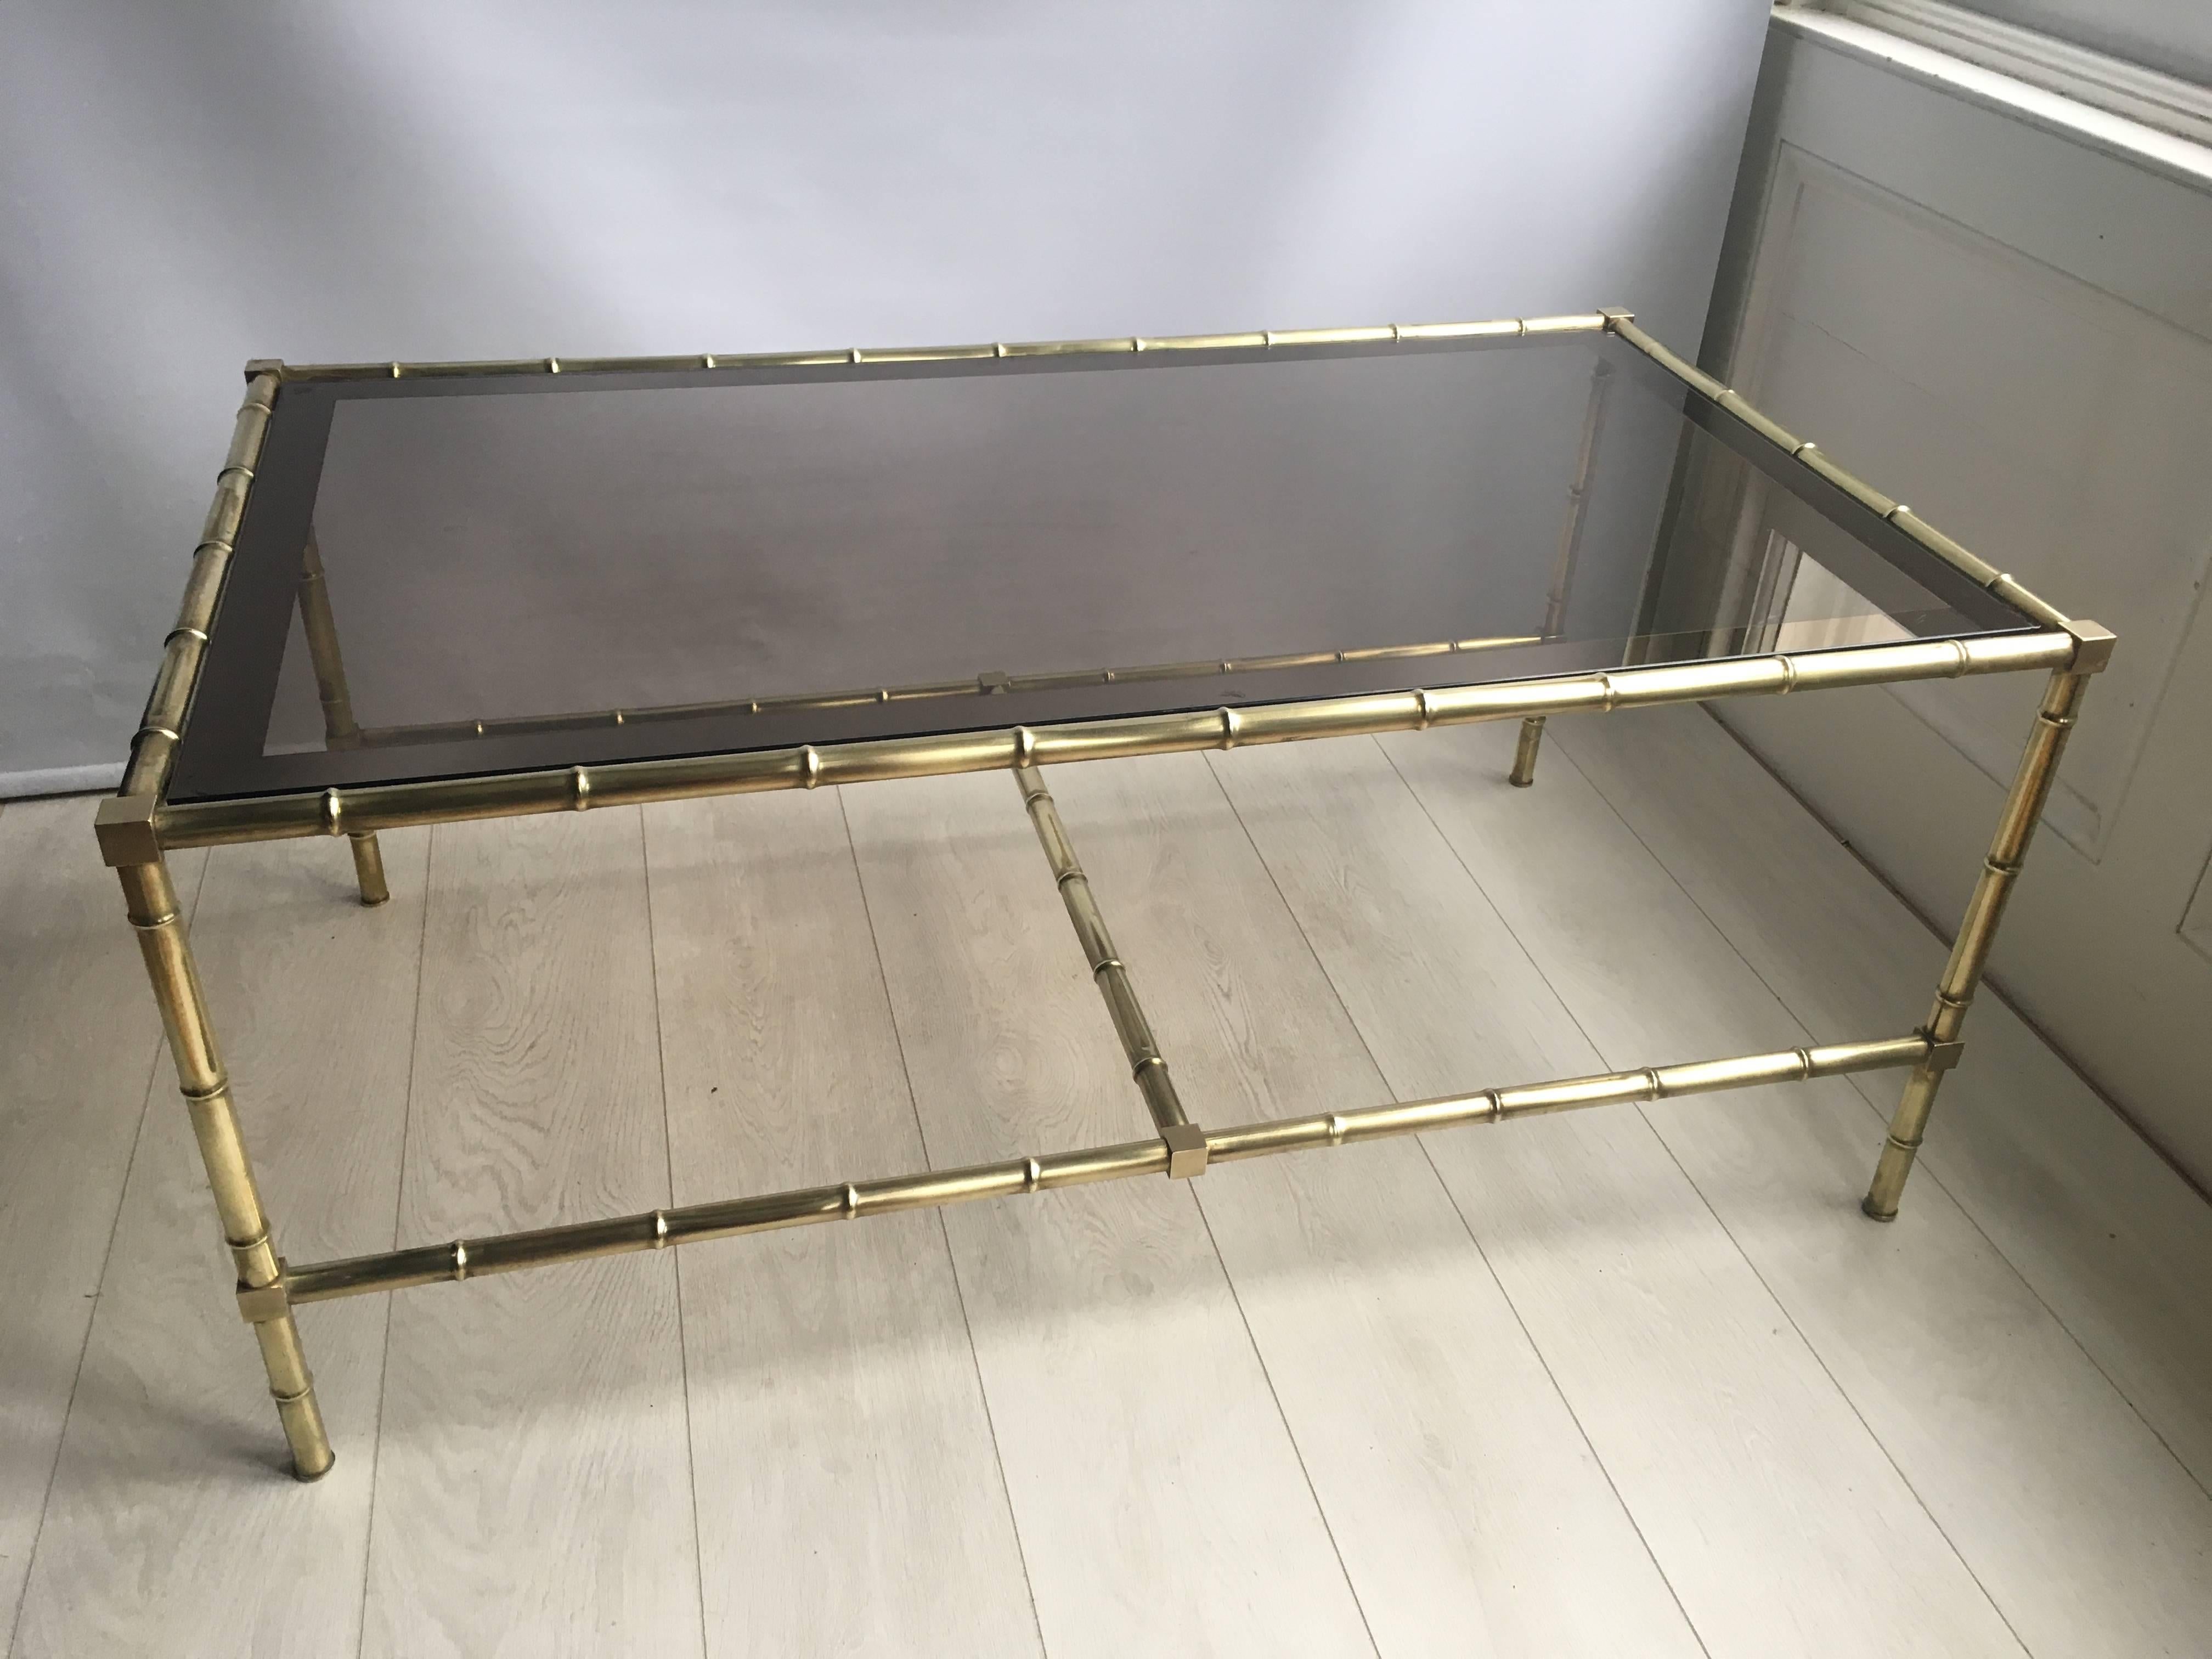 Fantastic faux bamboo coffee table from France, circa 1970

Polished brass frame with original tinted glass top

Great size at 115.5cm by 65.5cm and stands 50cm tall.